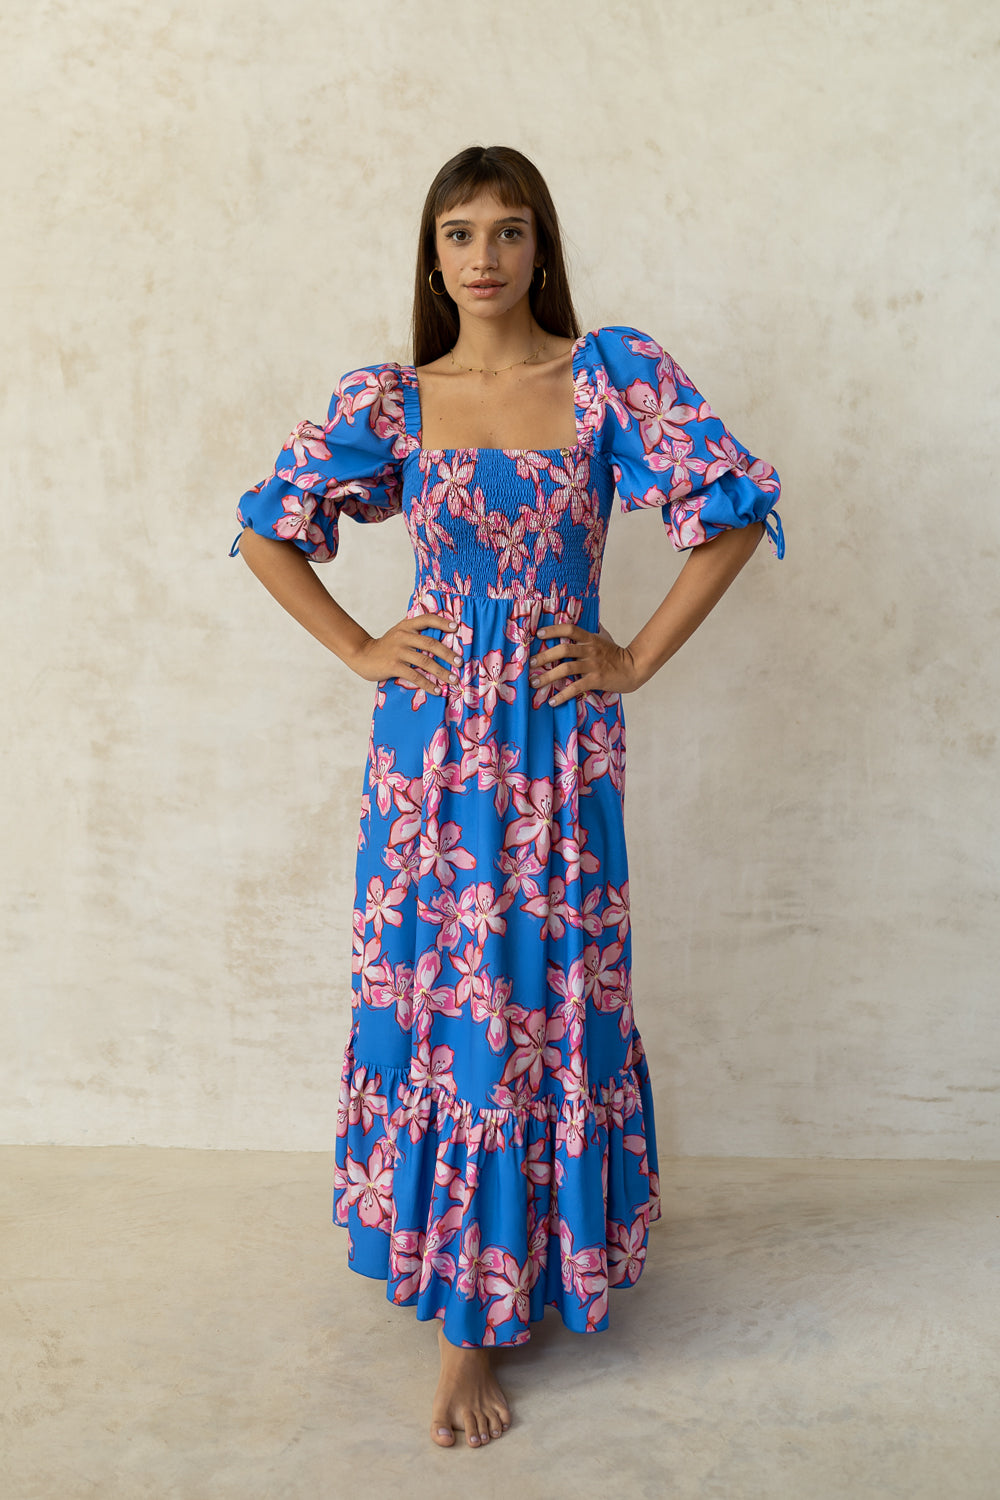 ZAFI REDLILLIES floral dress with a square neckline